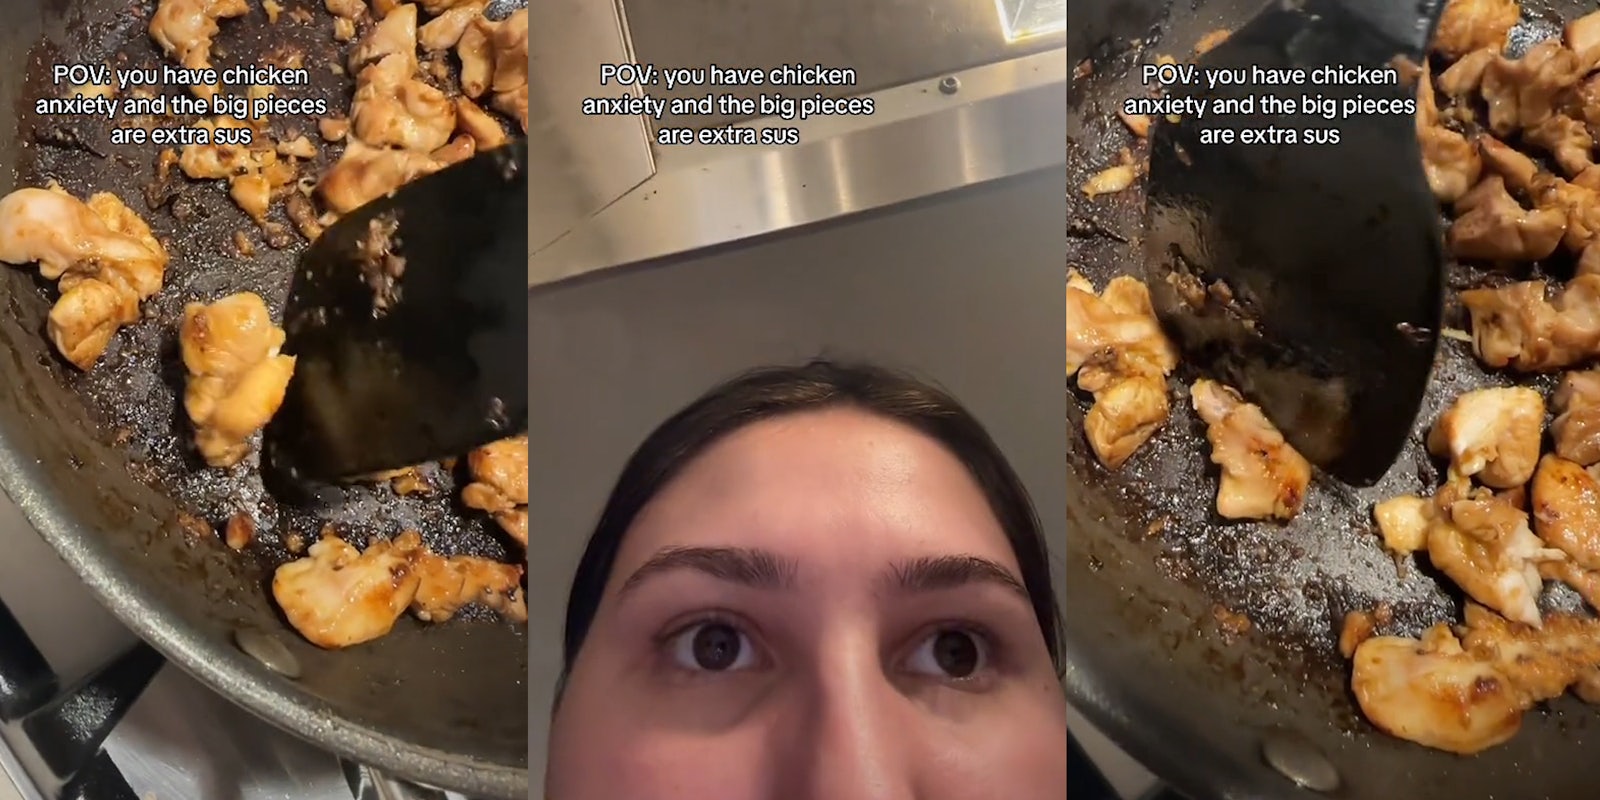 chicken cooking in pan with caption 'POV: you have chicken anxiety and the big pieces are looking extra sus' (l) woman staring with caption 'POV: you have chicken anxiety and the big pieces are looking extra sus' (c) chicken cooking in pan with caption 'POV: you have chicken anxiety and the big pieces are looking extra sus' (r)